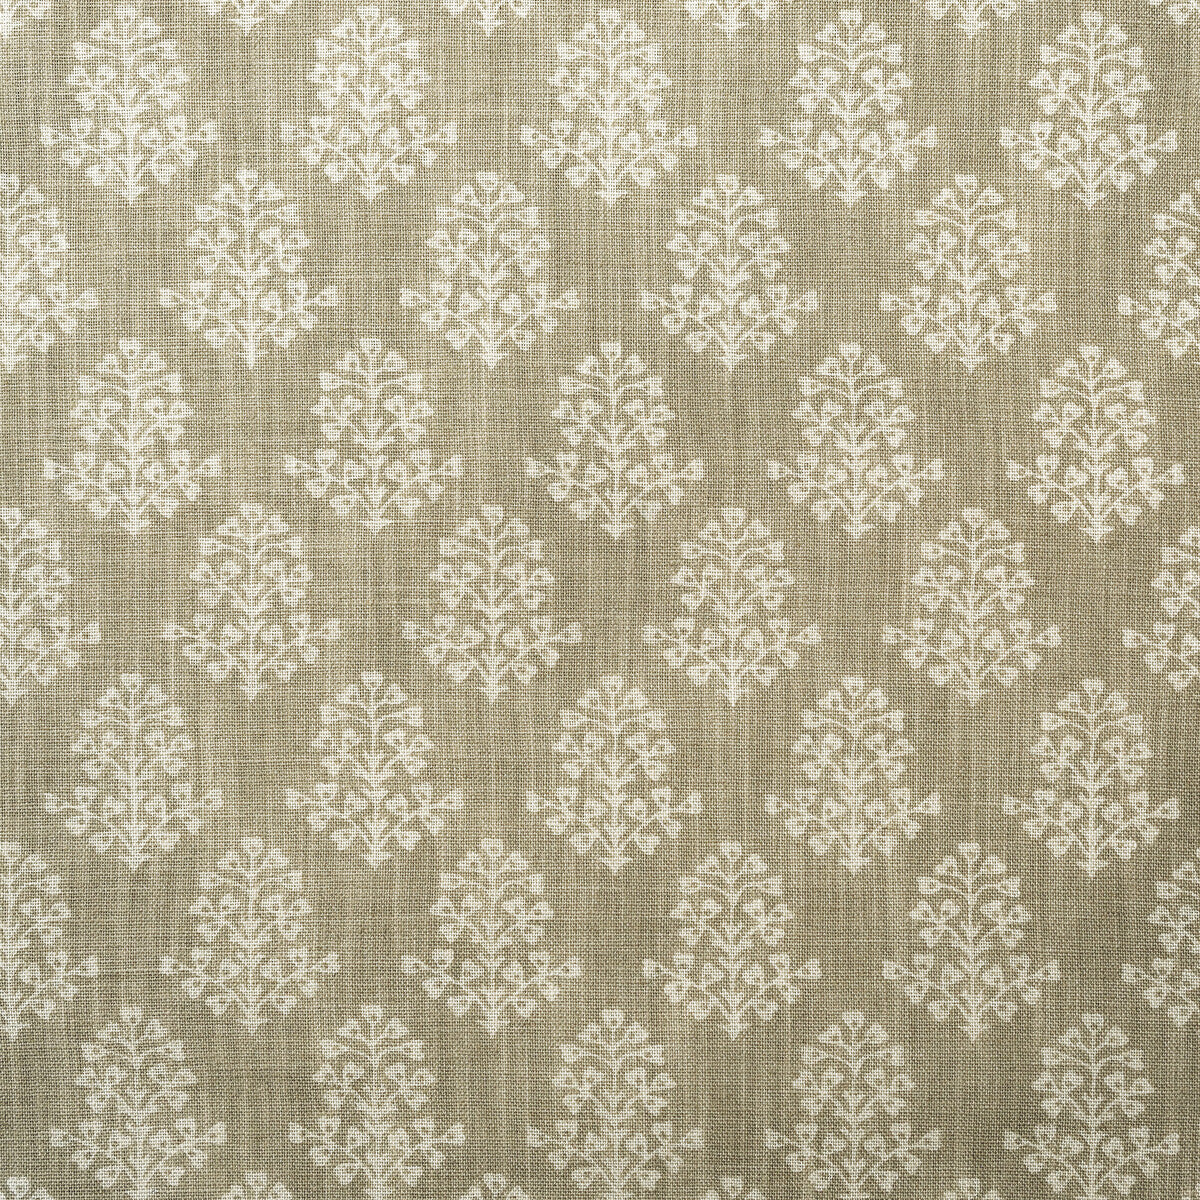 Sprig fabric in stone color - pattern AM100384.106.0 - by Kravet Couture in the Andrew Martin Garden Path collection